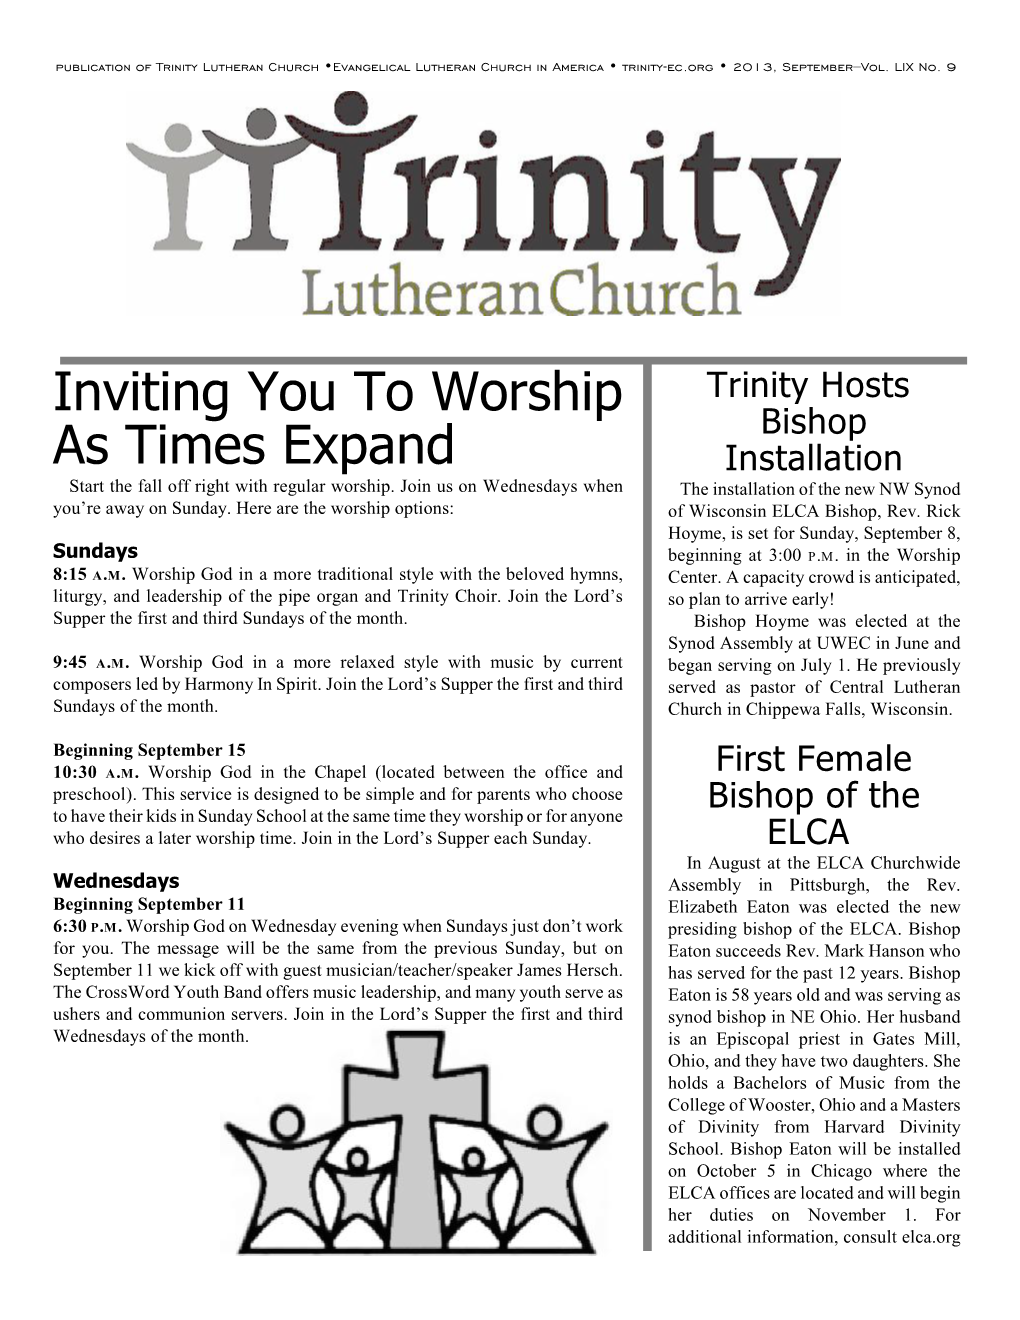 Inviting You to Worship As Times Expand